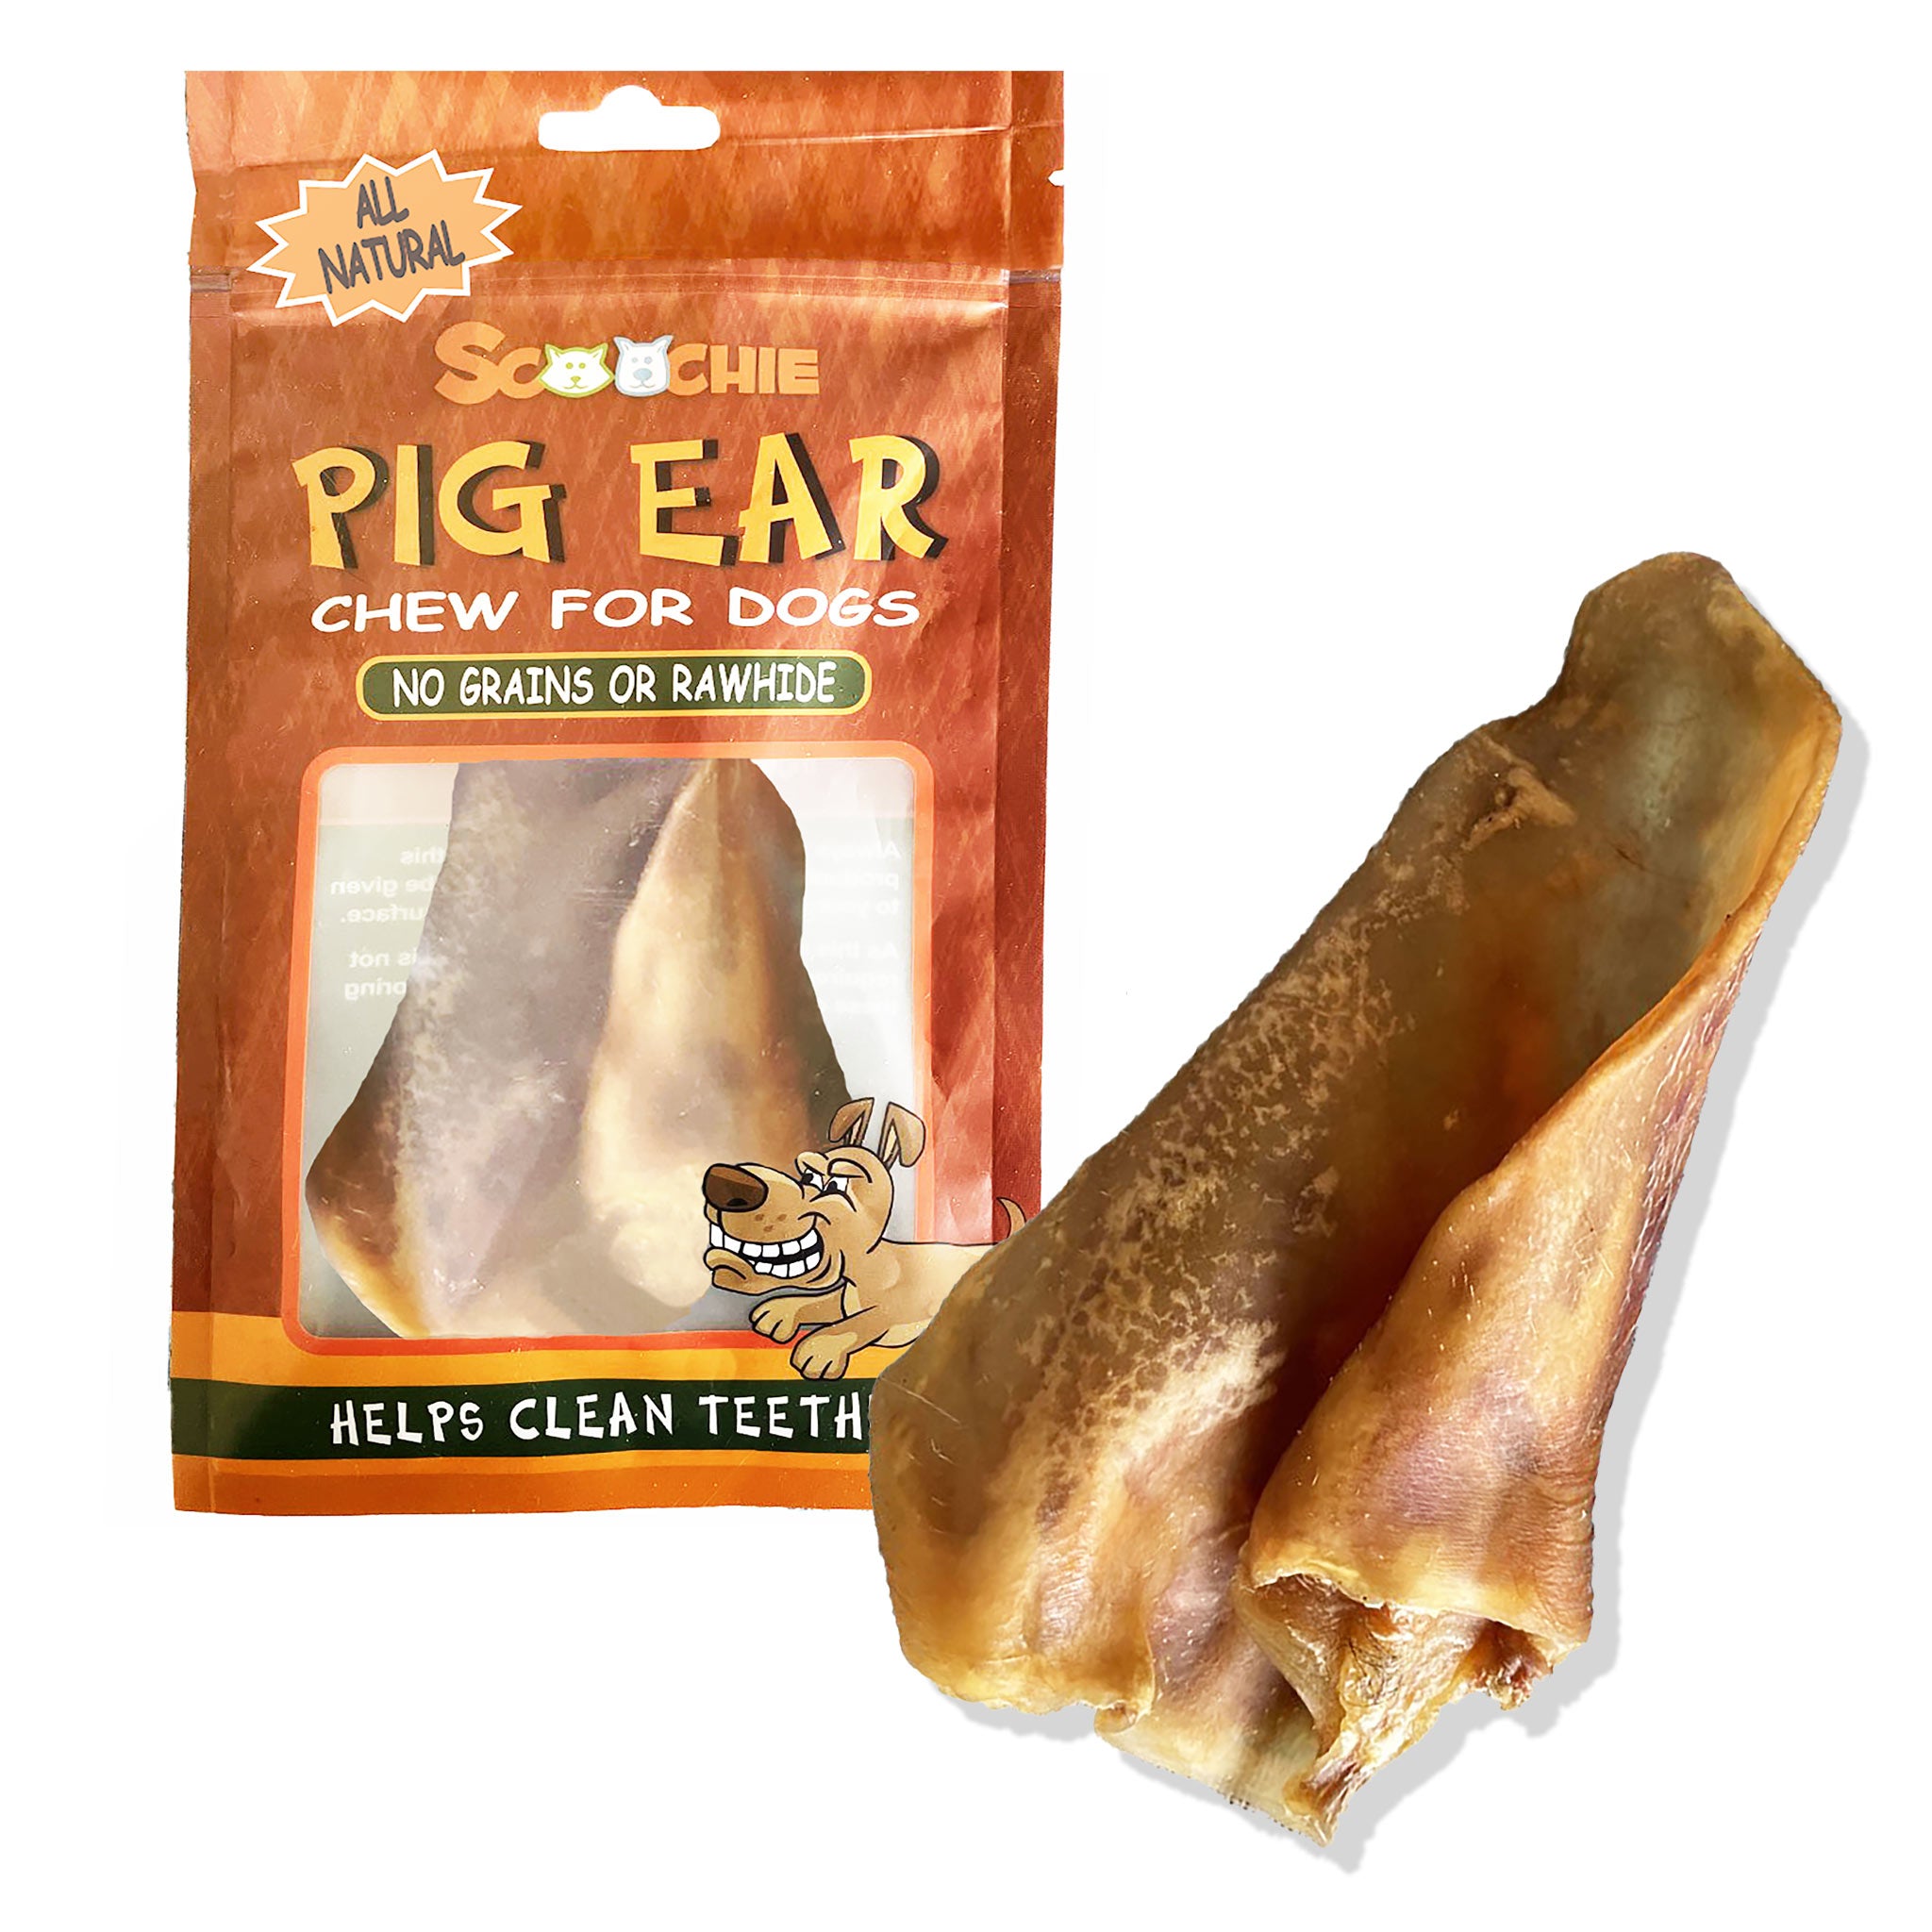 All Natural Pig Ear For Dogs